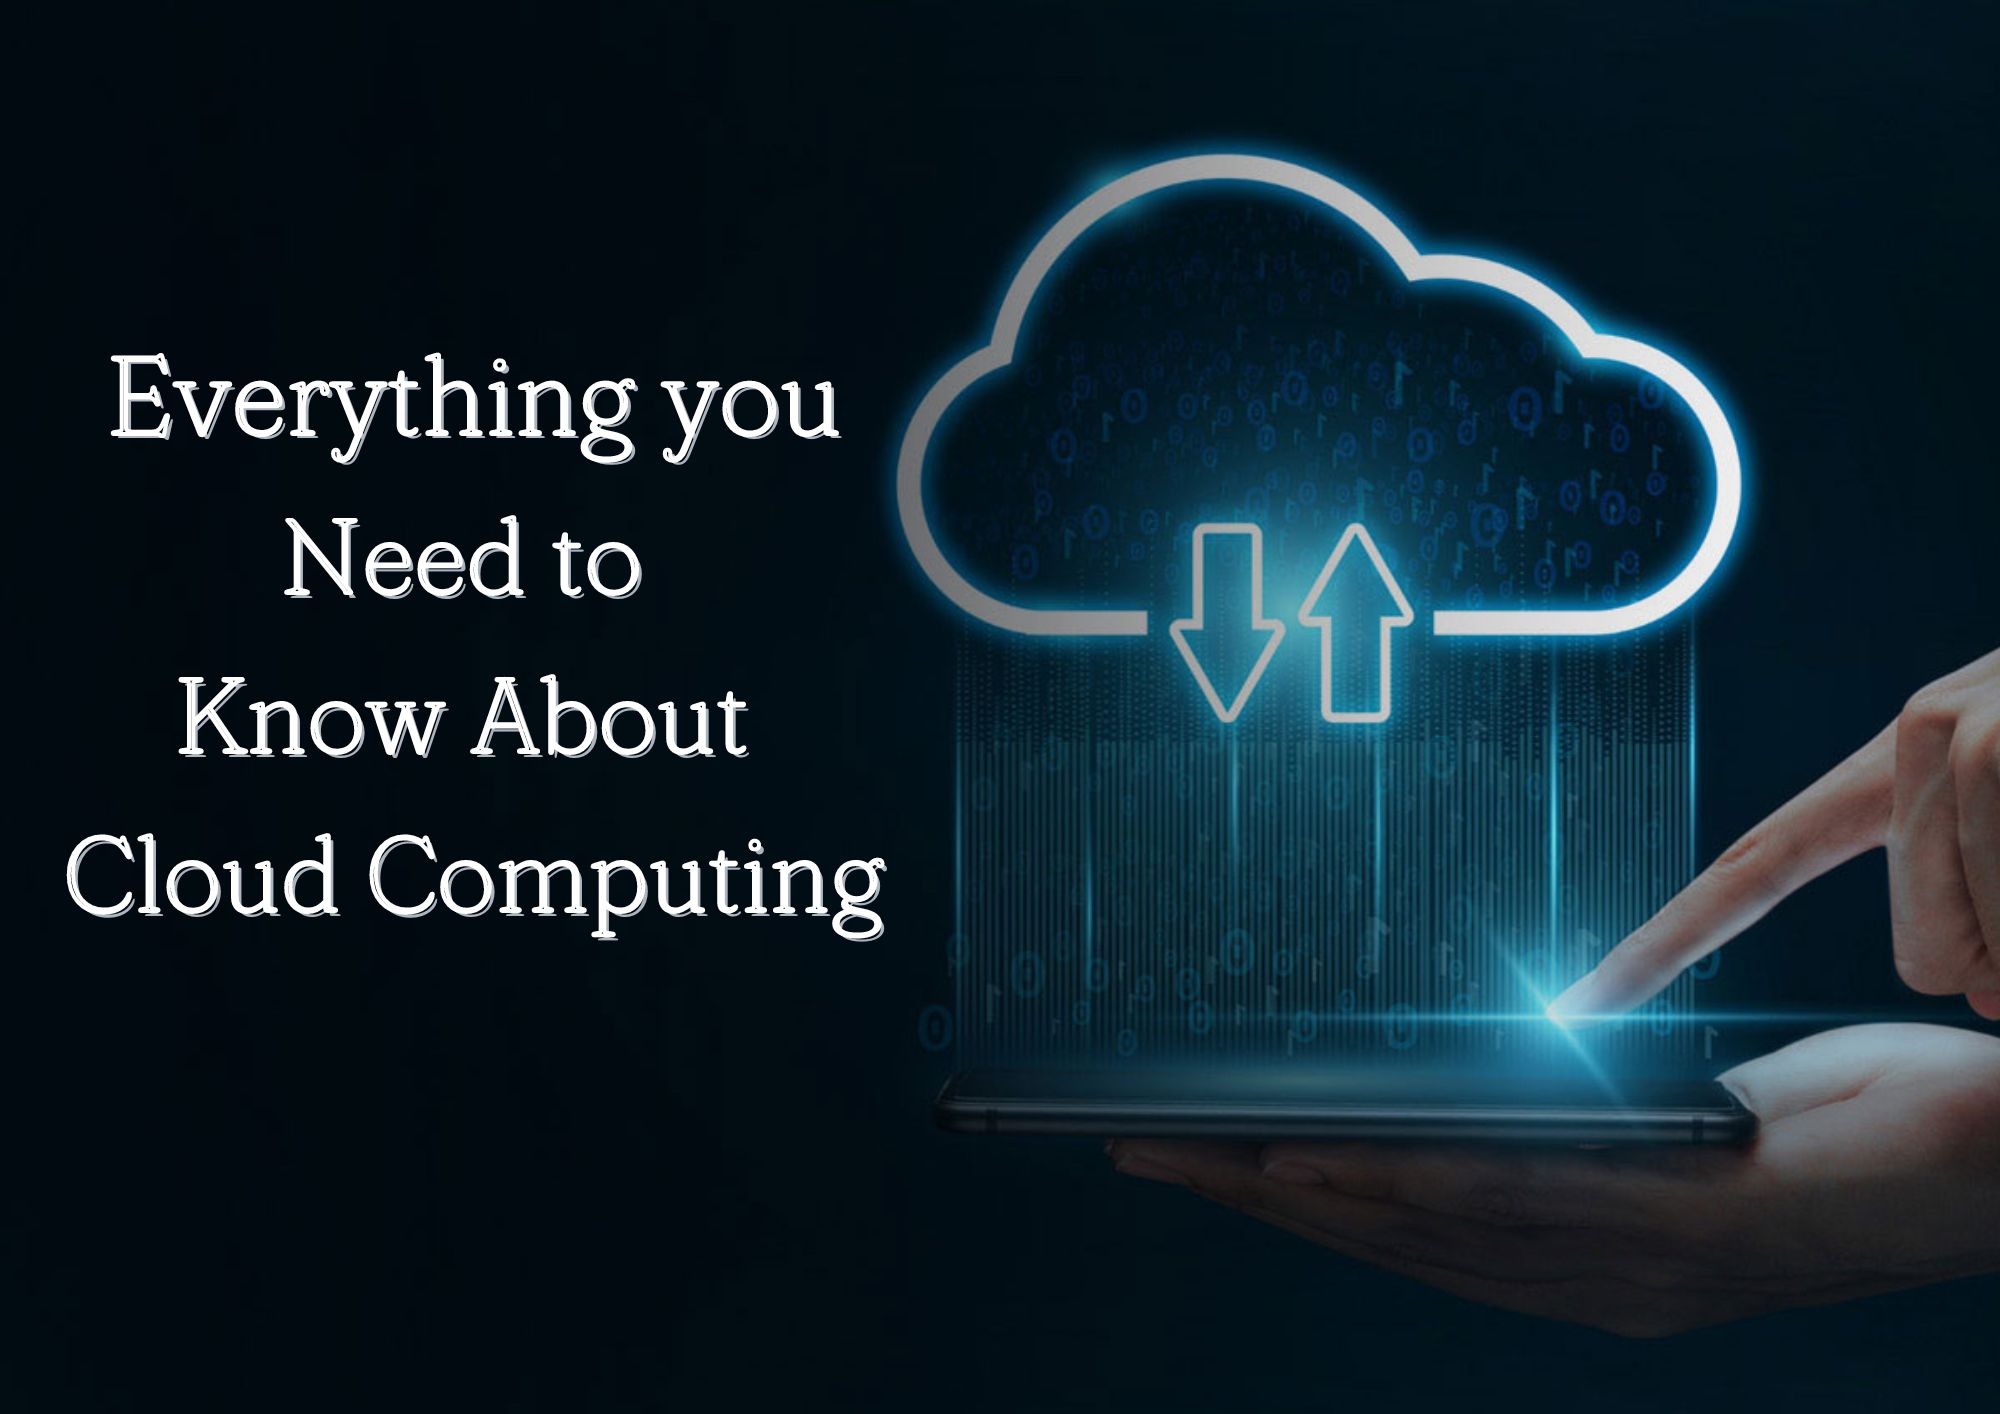 Everything you need to know about cloud computing